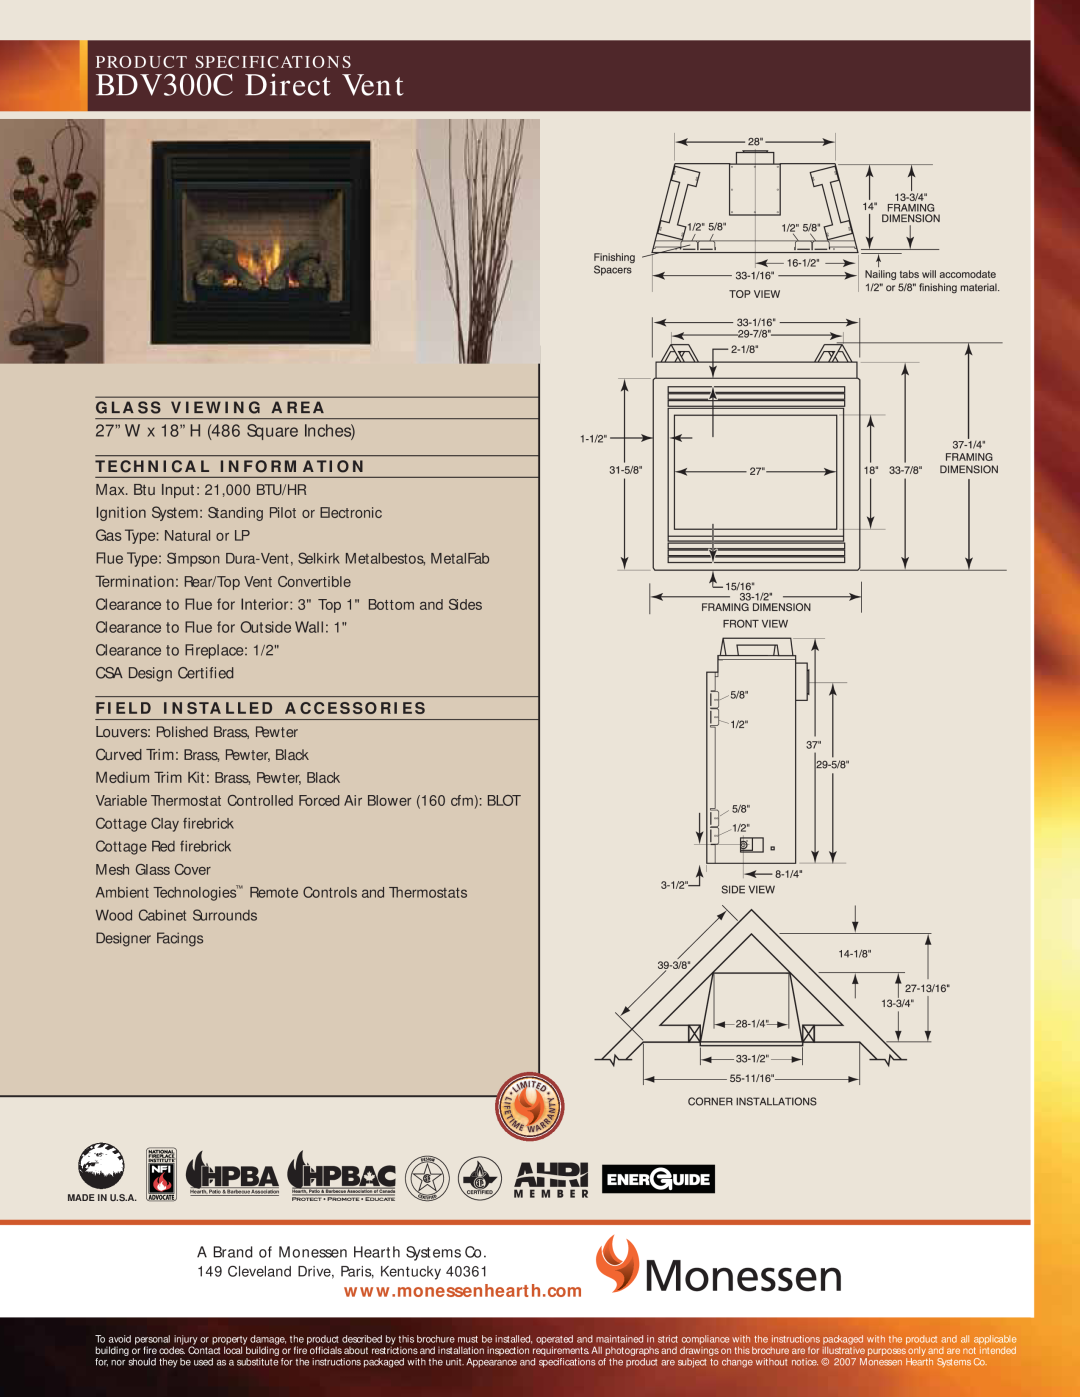 Monessen Hearth specifications BDV300C Direct Vent, Product Specifications 